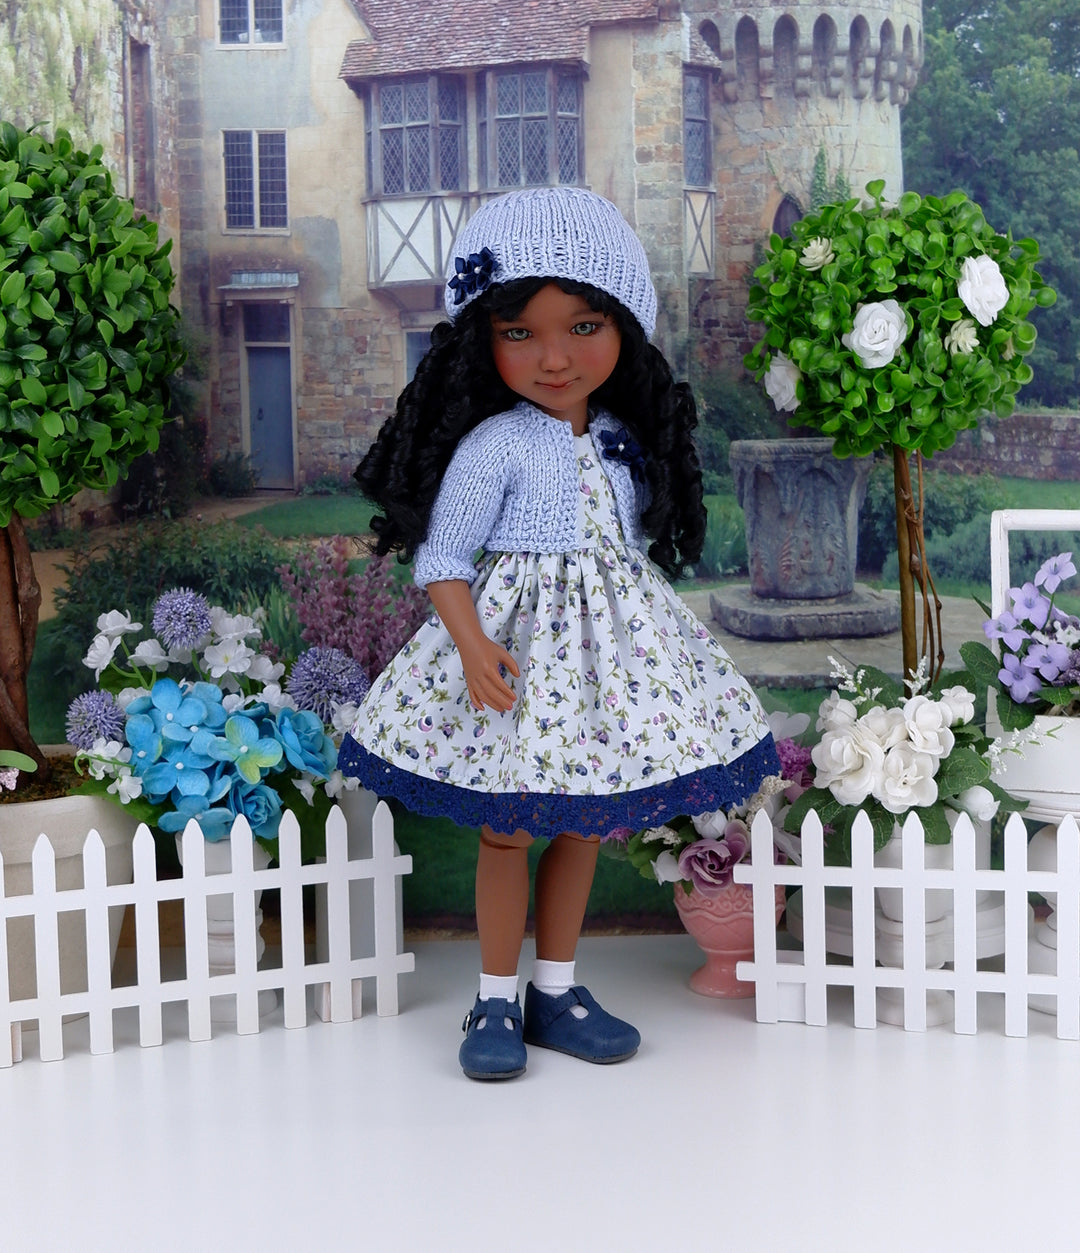 Blue Viola - dress and sweater set with shoes for Ruby Red Fashion Friends doll